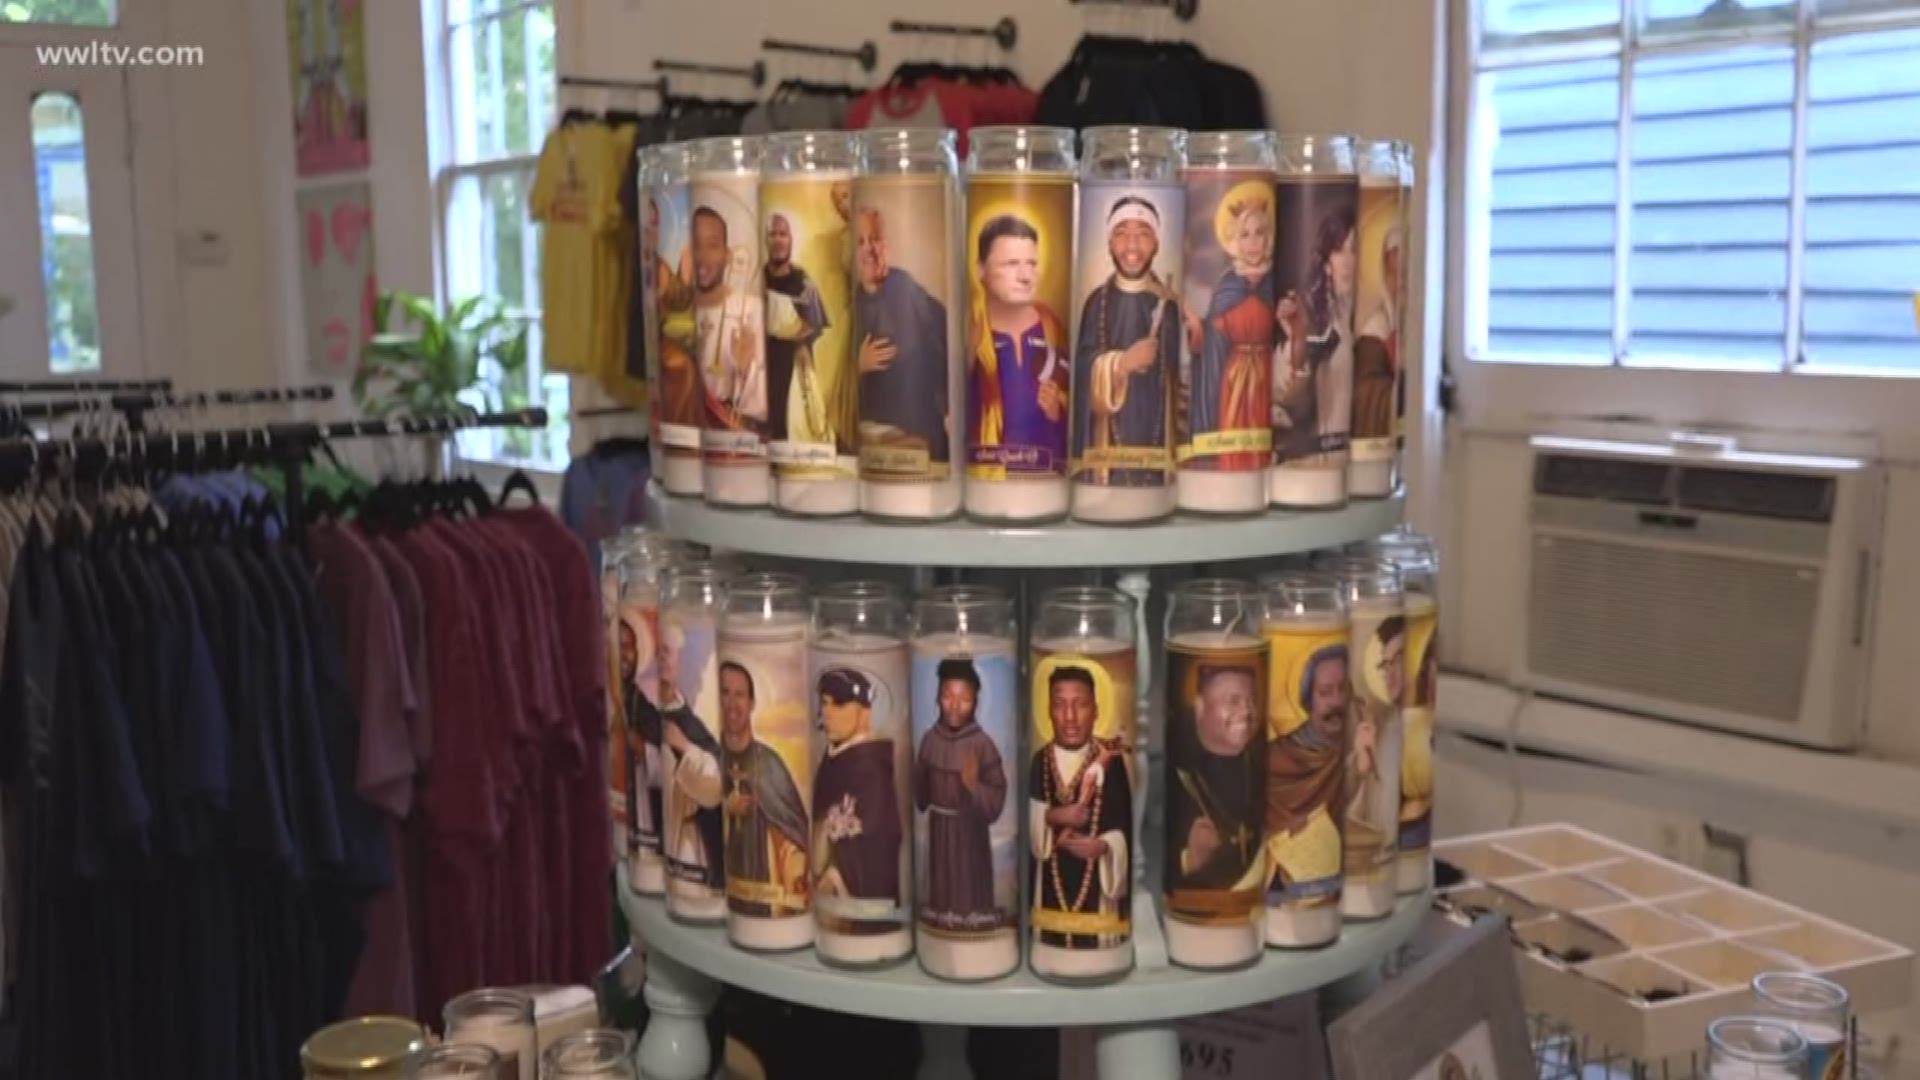 Football is a religion in New Orleans and this shop is taking that religion one step further.